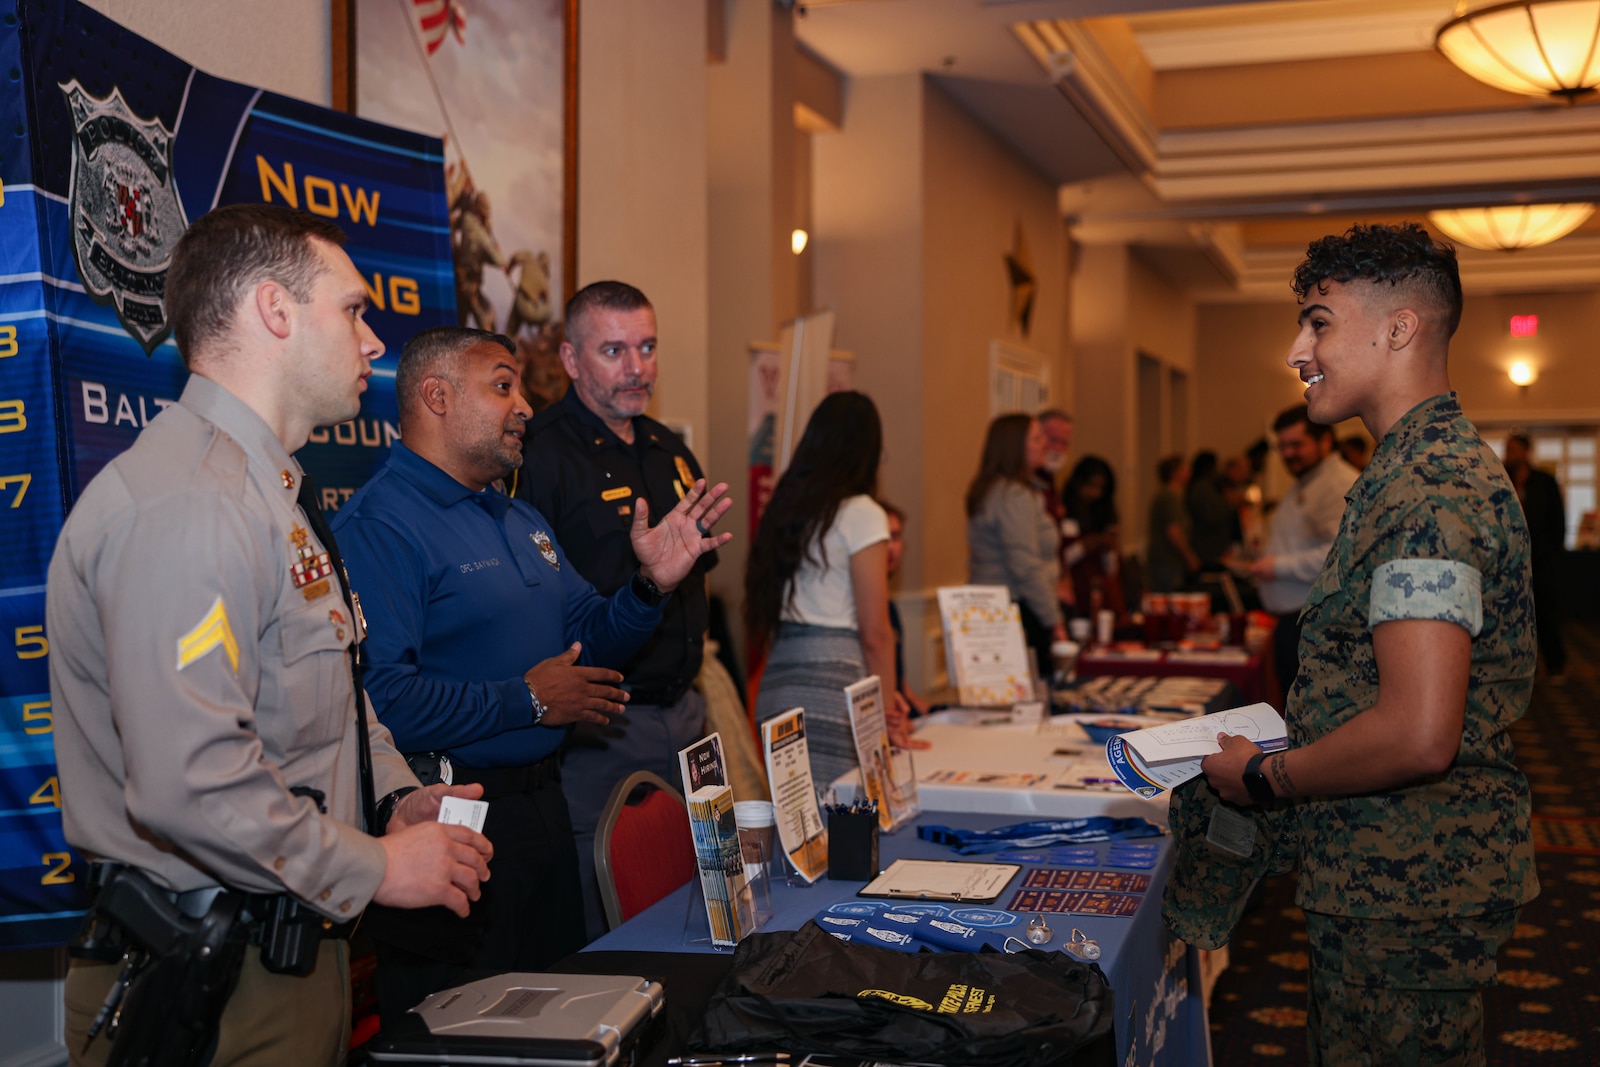 Police Officers with Baltimore County speak to a U.S. Marine with the Wounded Warrior Regiment during the 2024 Wounded Warrior Education, Internship and Career Recourse Fair at the Clubs of Quantico on Marine Corps Base Quantico, Virginia, March 27, 2024. The resource fair provides Wounded Warriors transitioning out of the military, various connections and opportunities to help them in future endeavors. (U.S. Marine Corps photo by Lance Cpl. David Brandes)